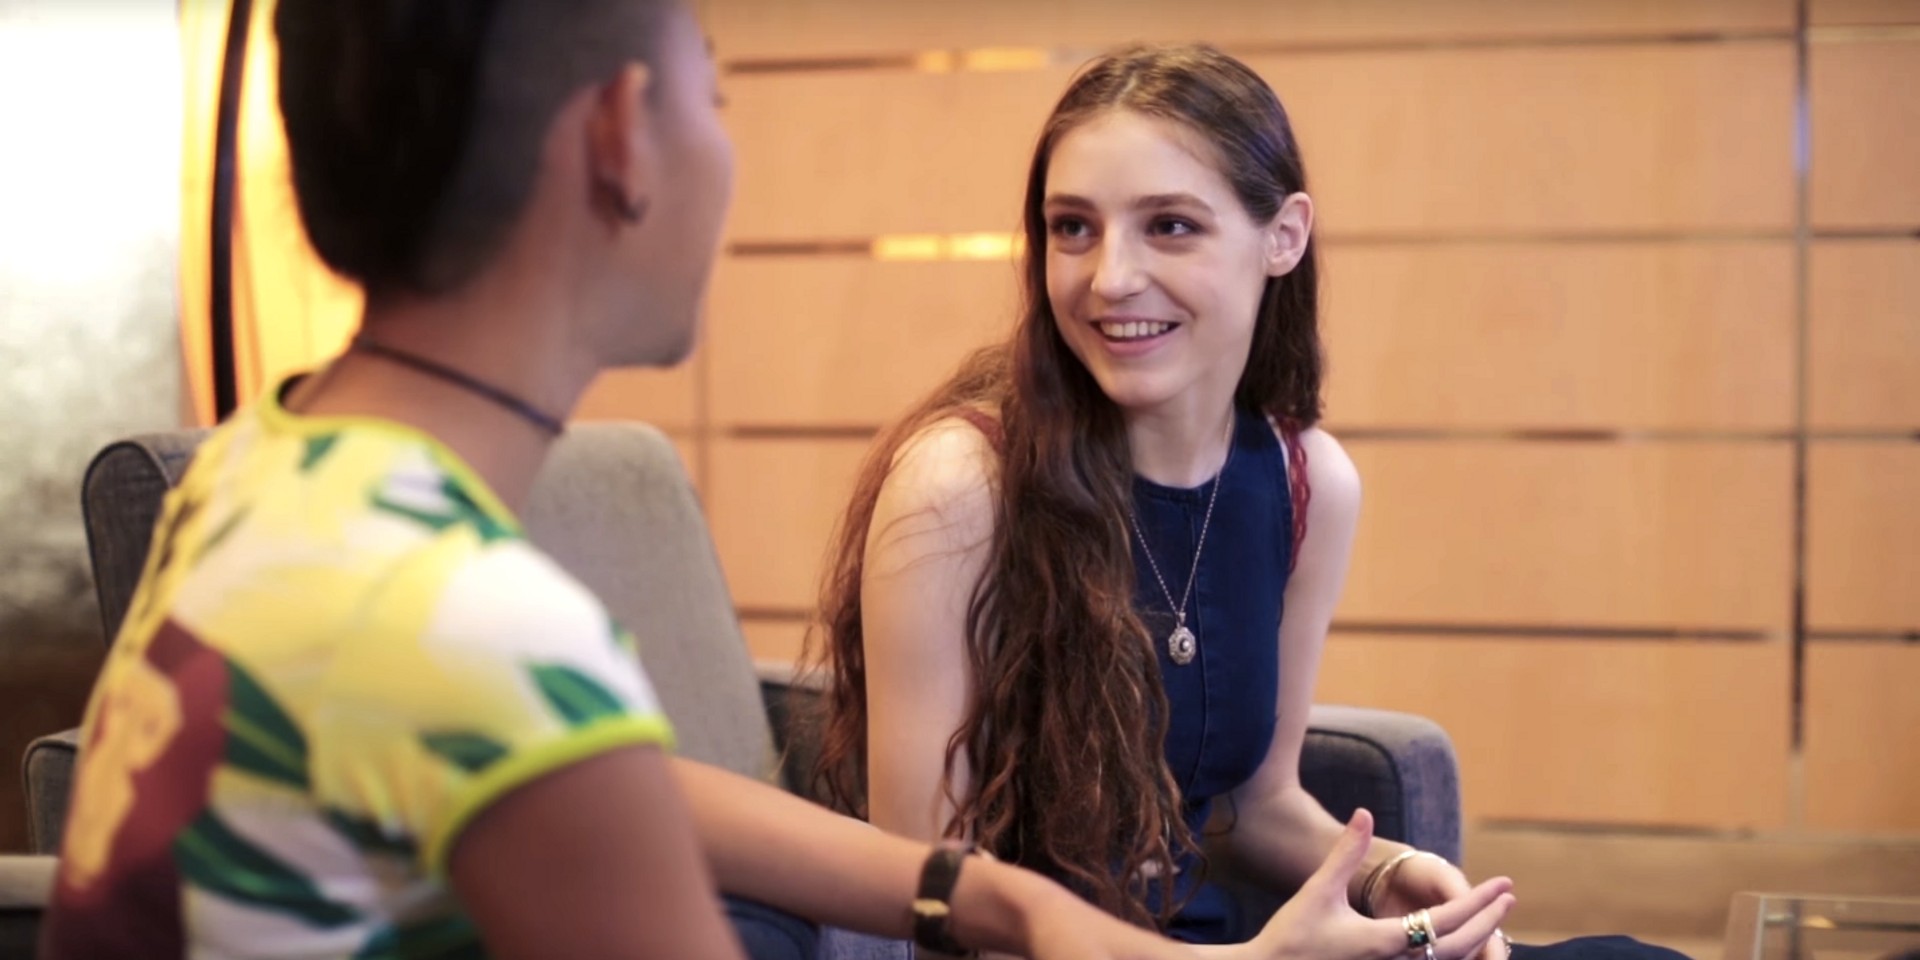 WATCH: Birdy talks about her love for Snapchat, getting nervous on stage and more